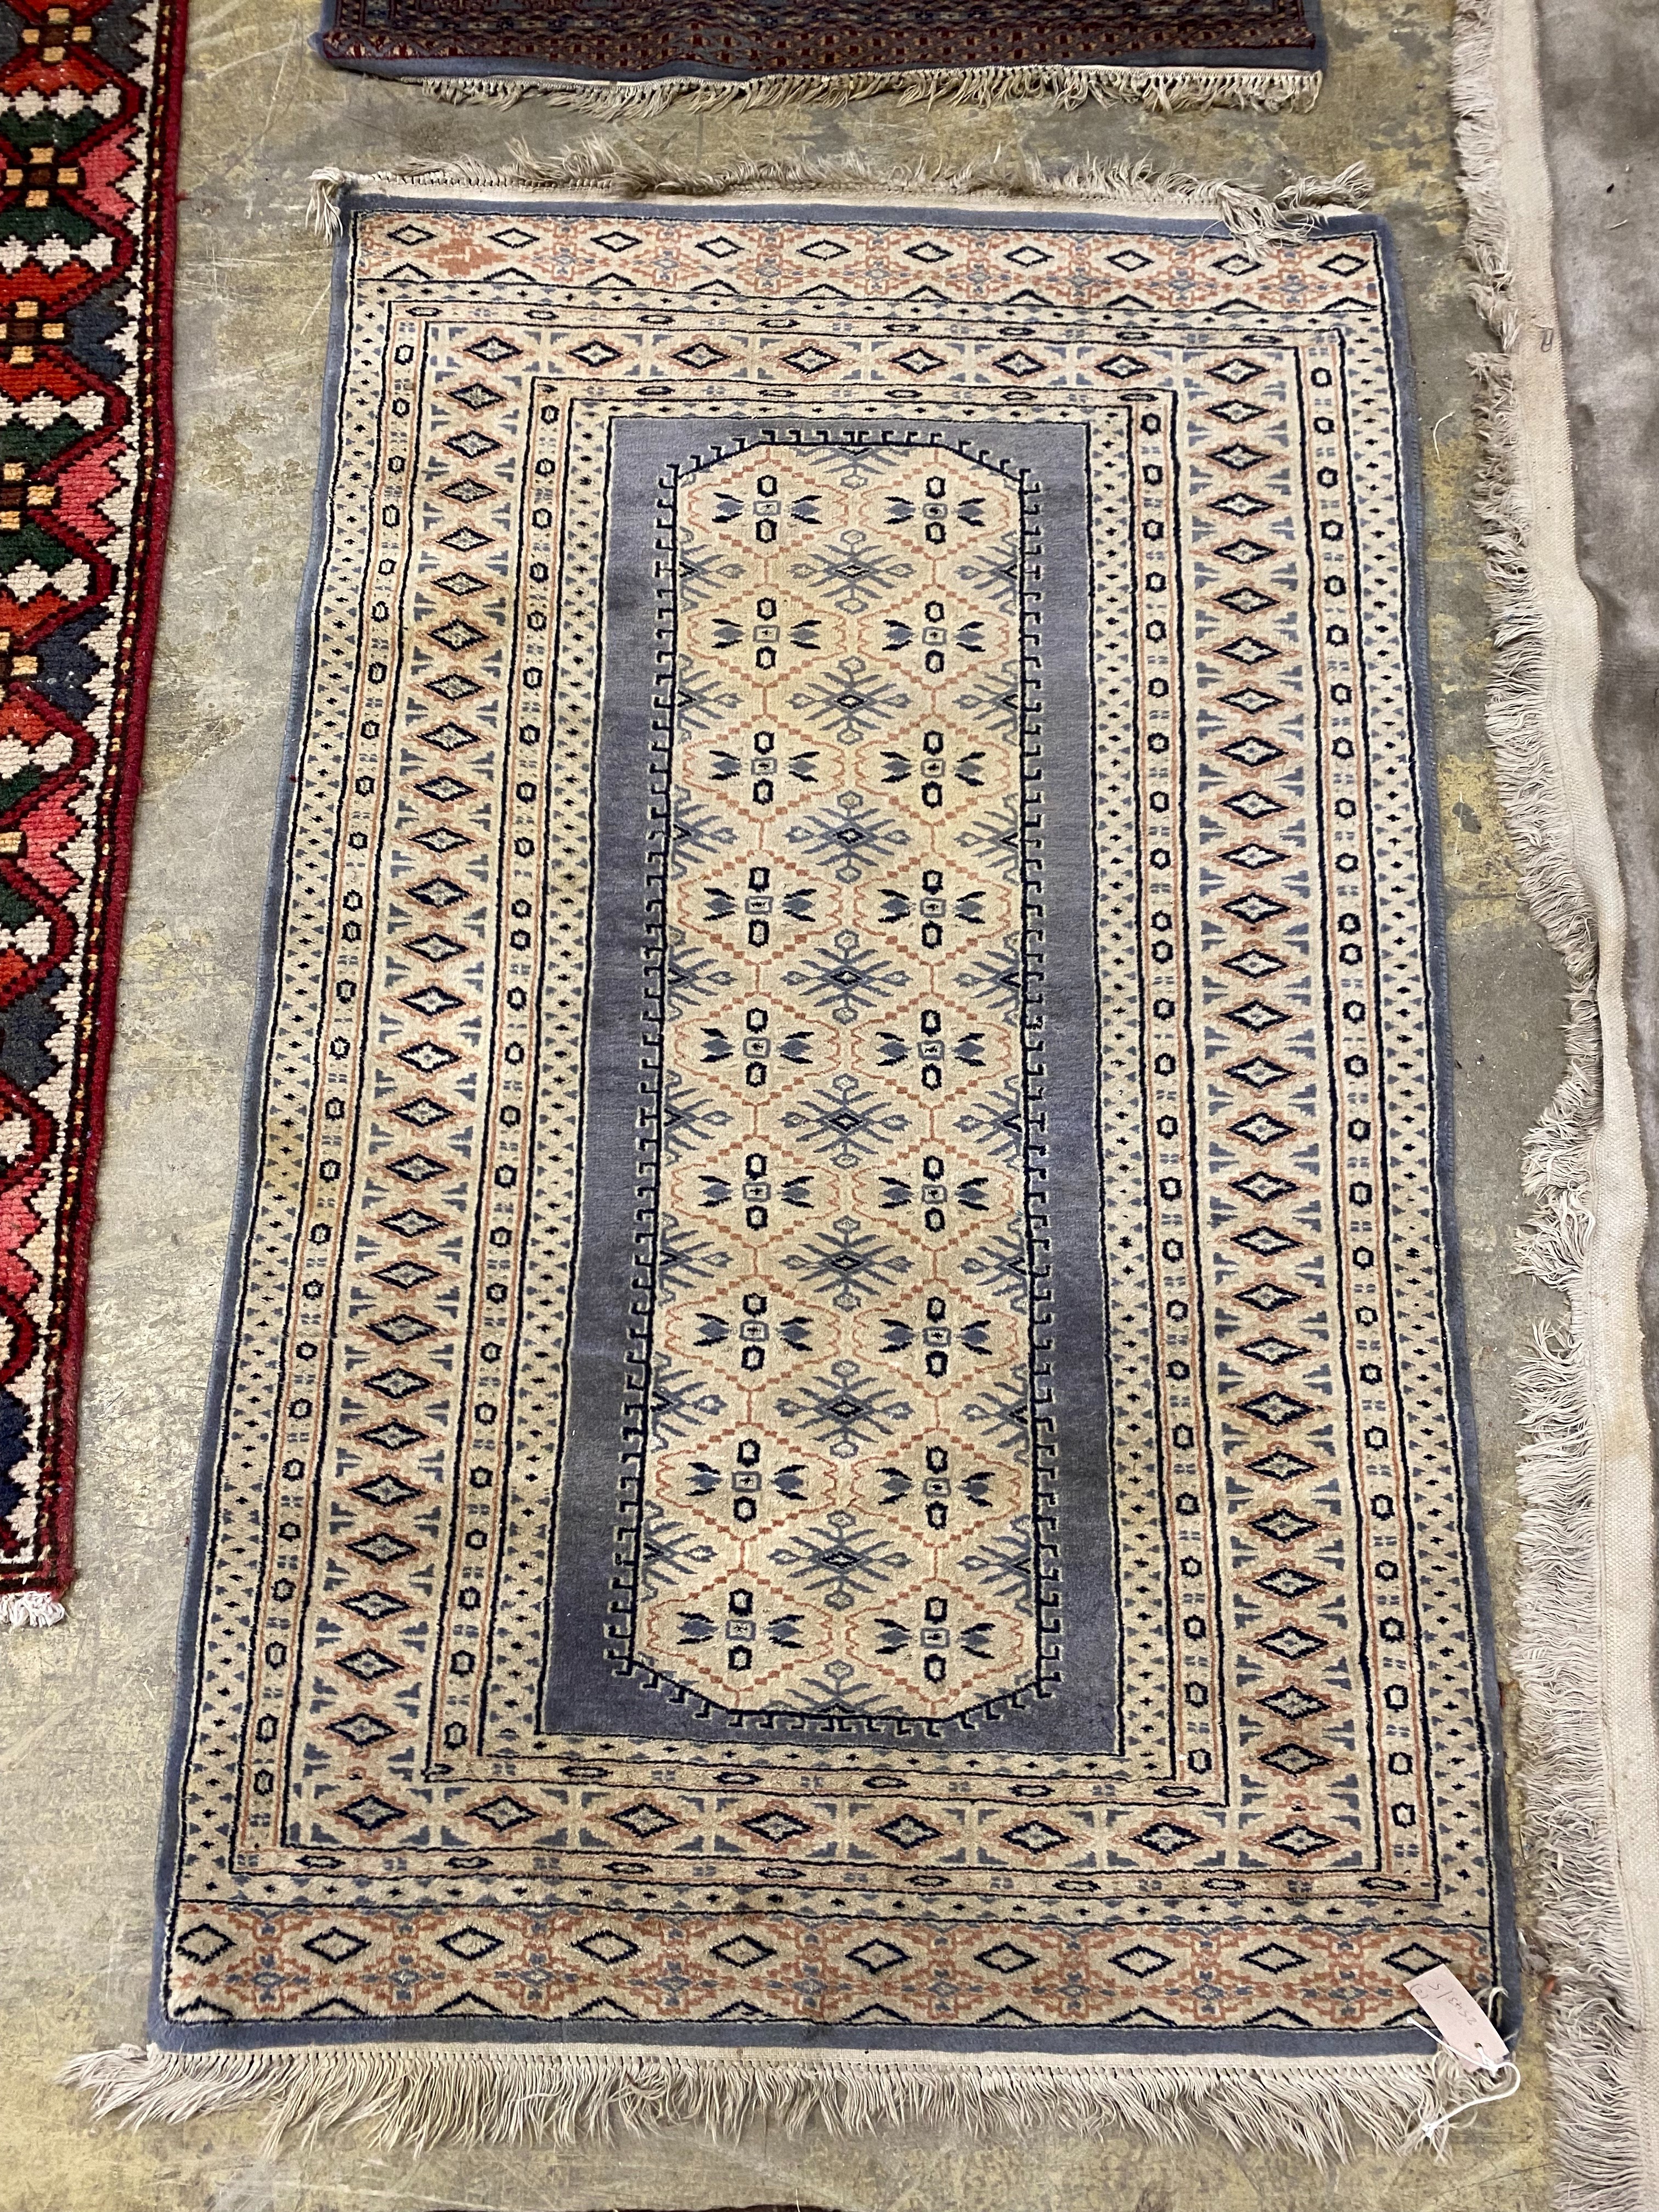 Two Bokhara rugs, largest 170 x 92cm